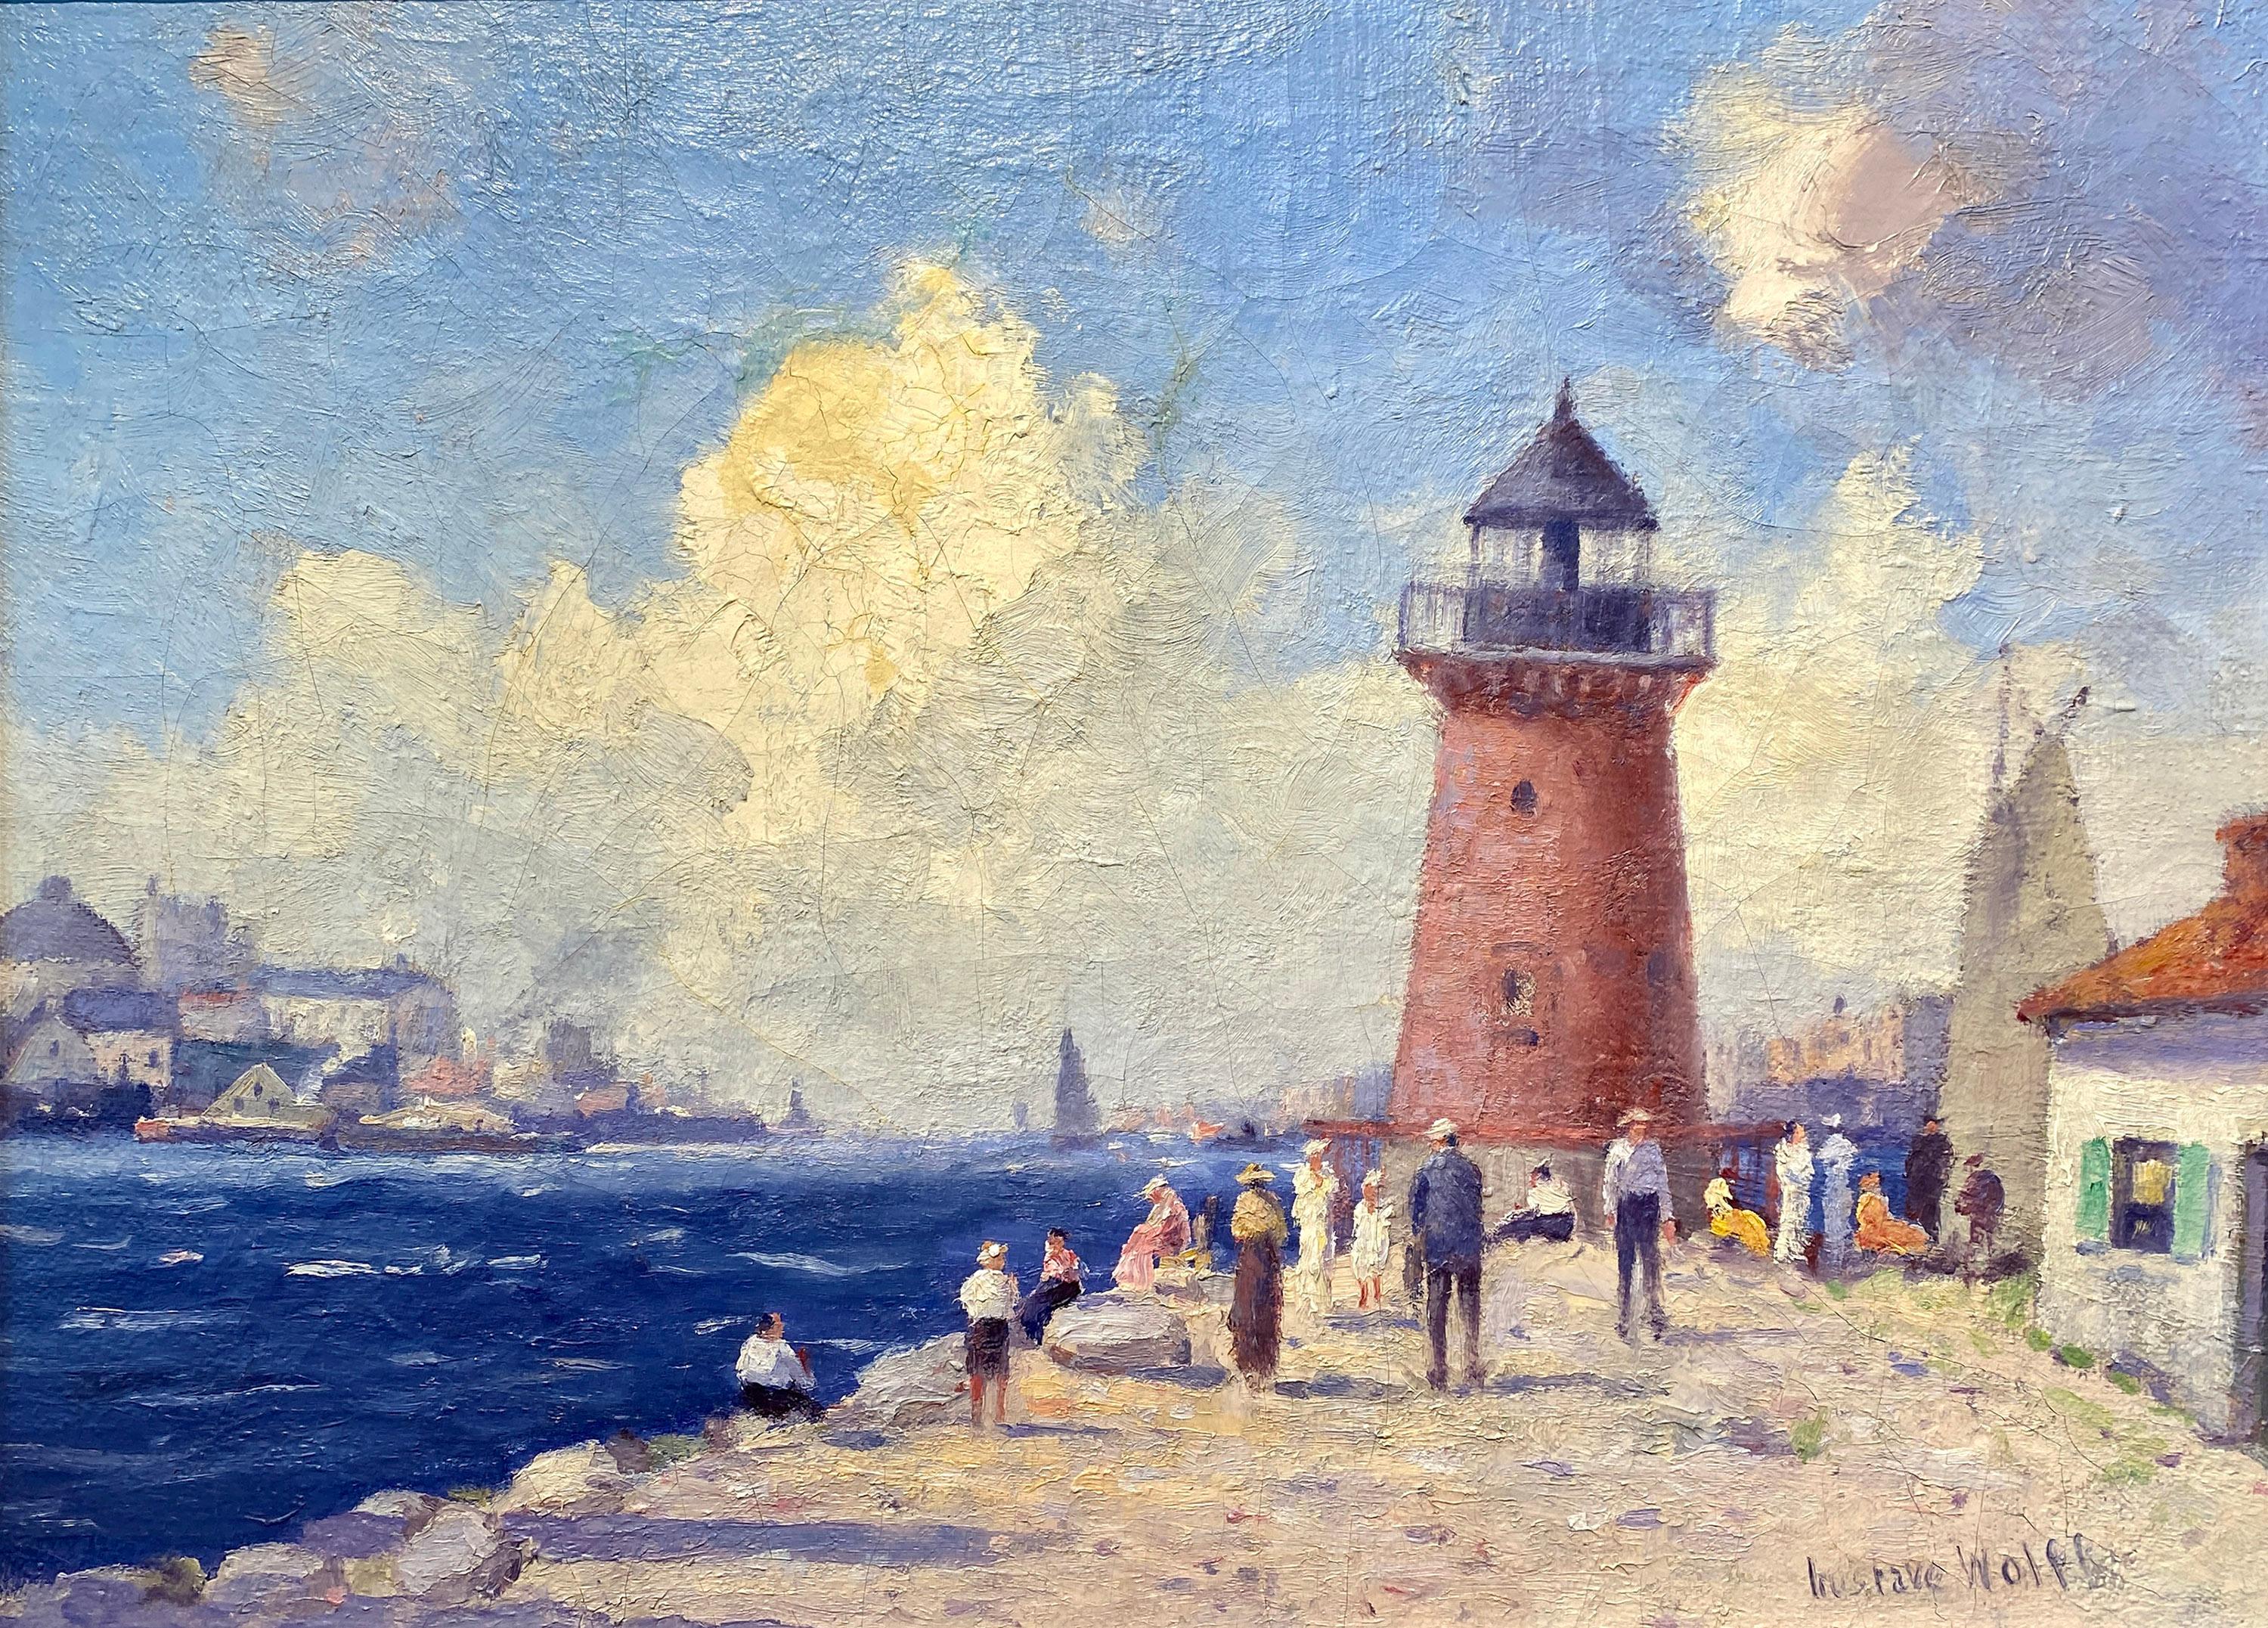 Gustave Wolff  Landscape Painting - The Little Red Lighthouse, New York